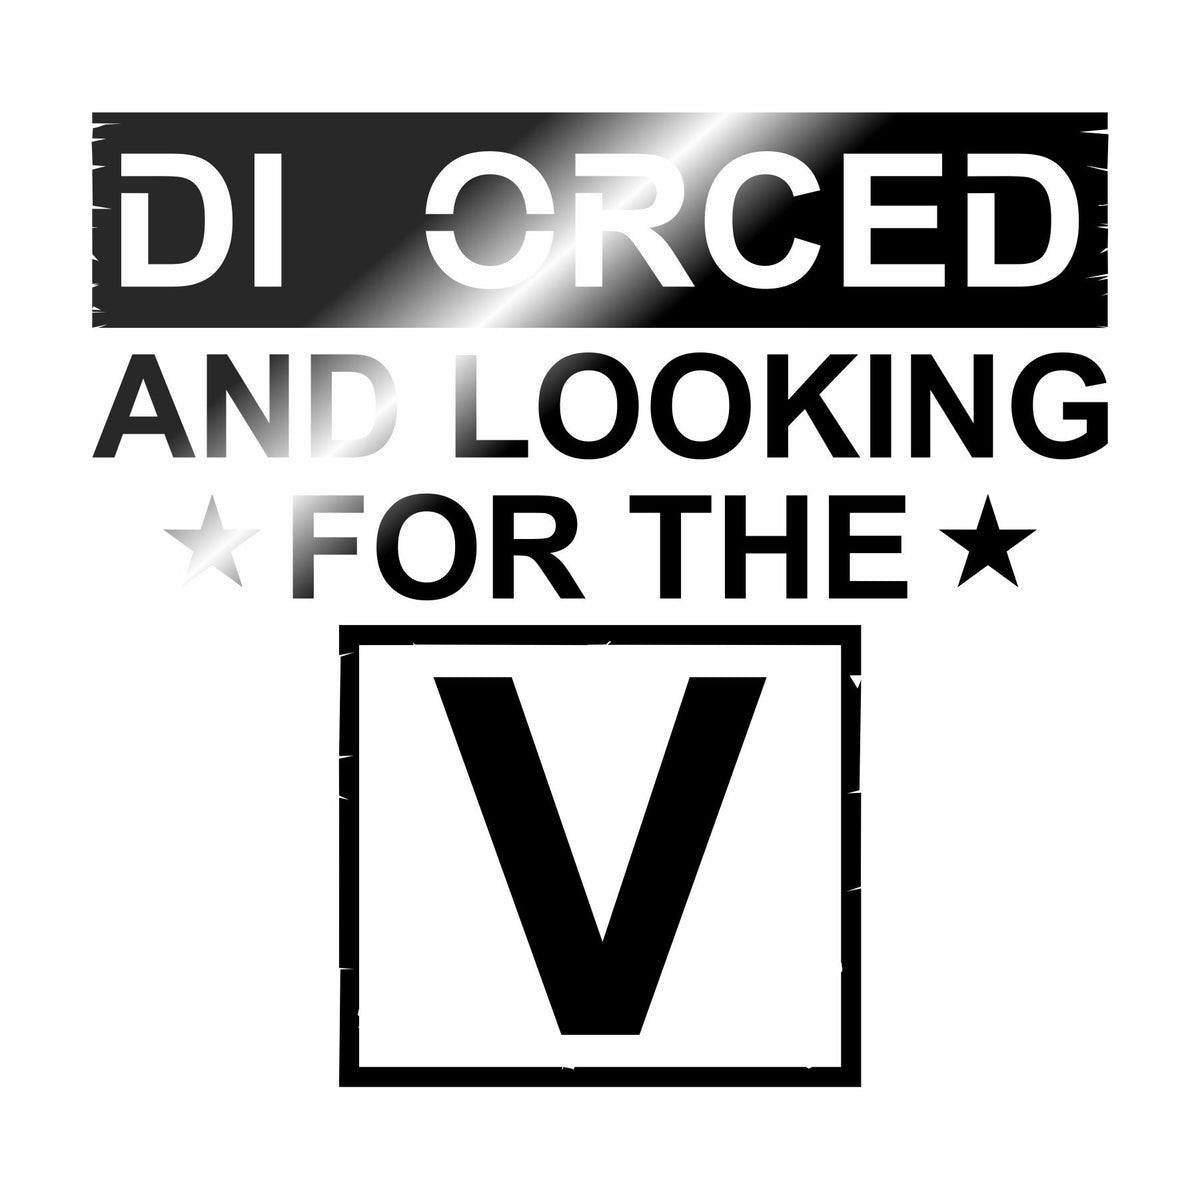 Divorced and Looking for the V - Vinyl Decal - Free Shipping